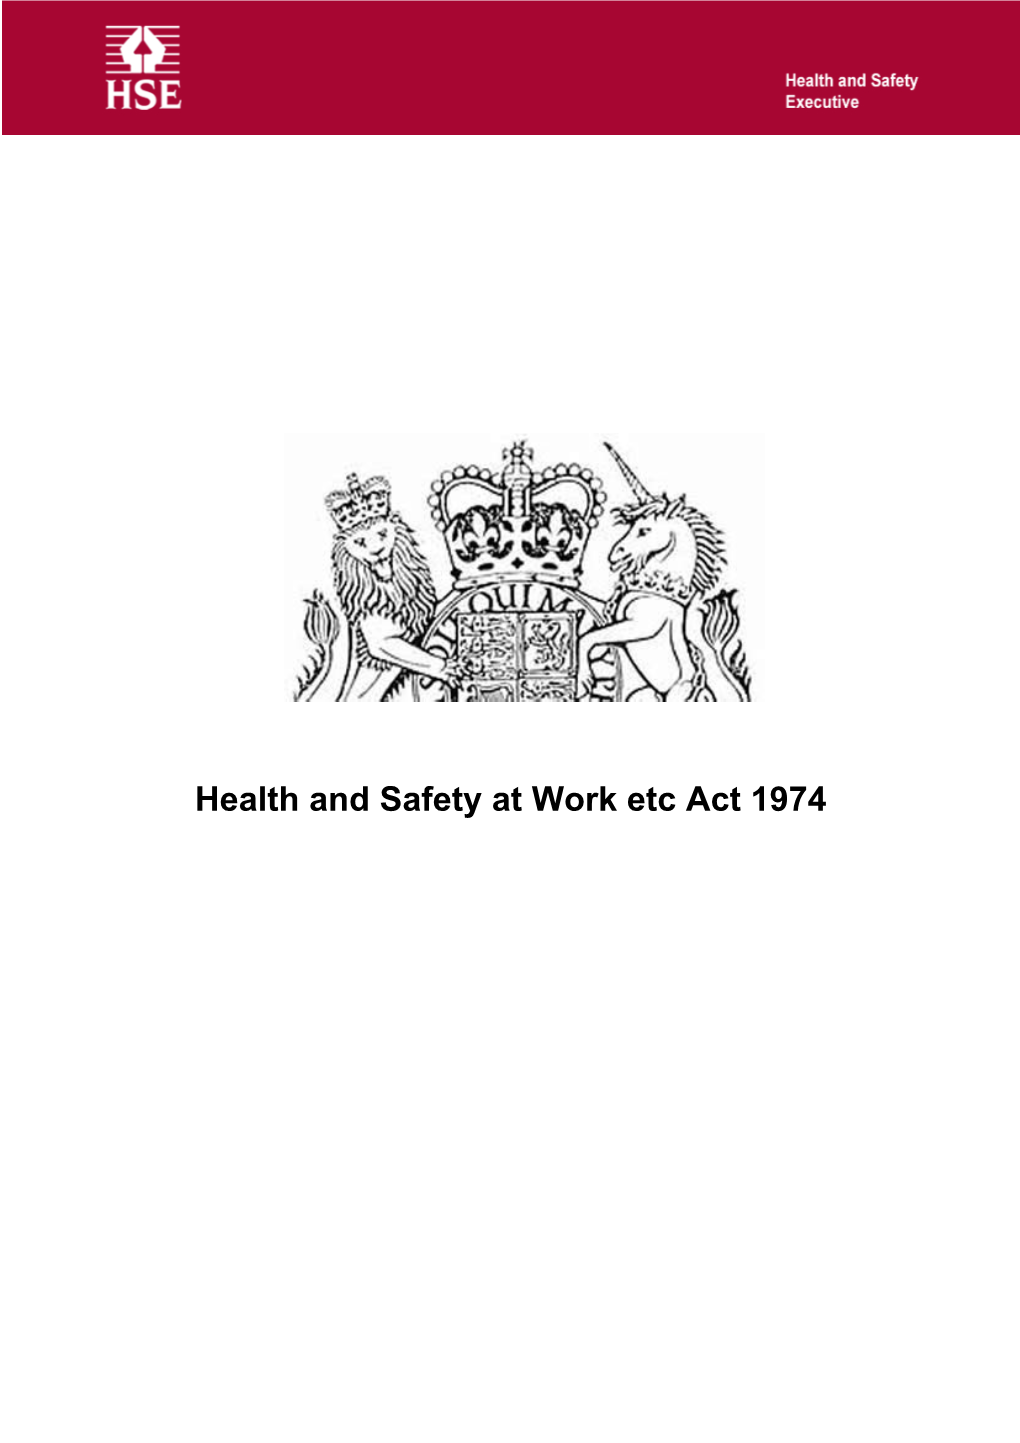 Health and Safety at Work Etc Act 1974 Page 1